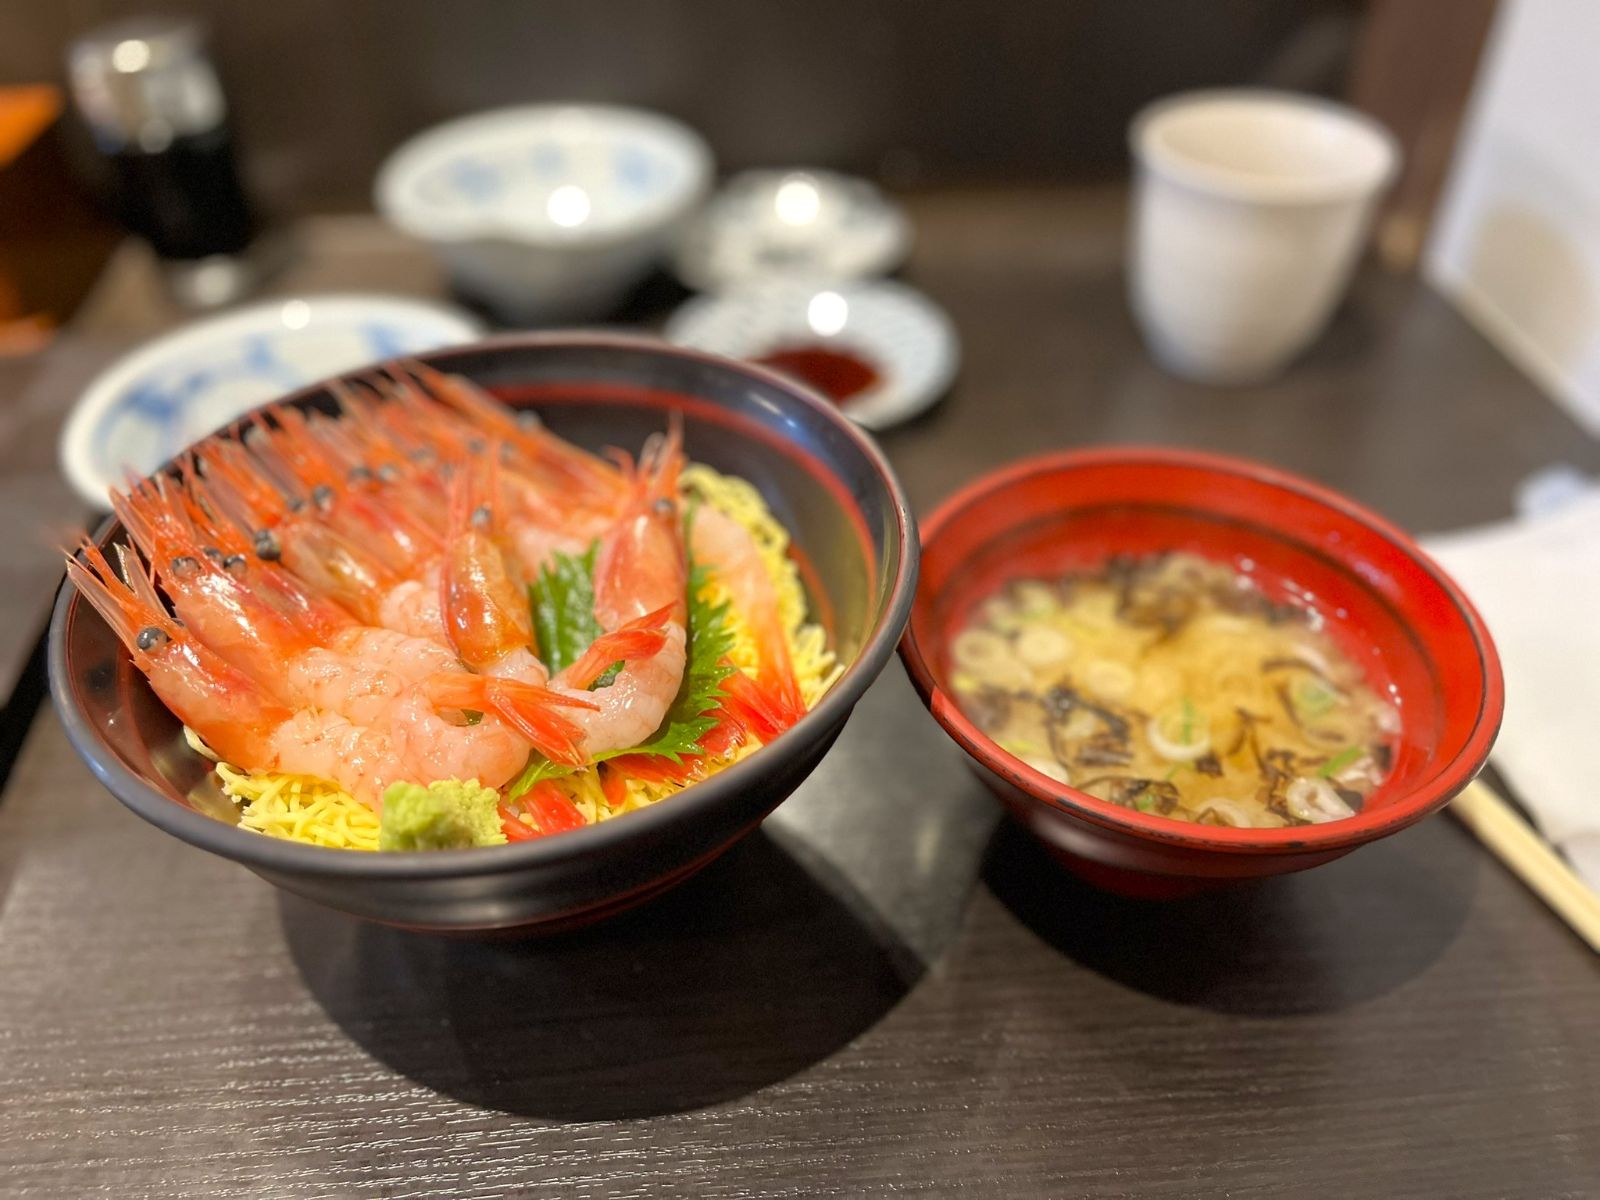 Seafood dish served at Onicho Fish Market in Japan